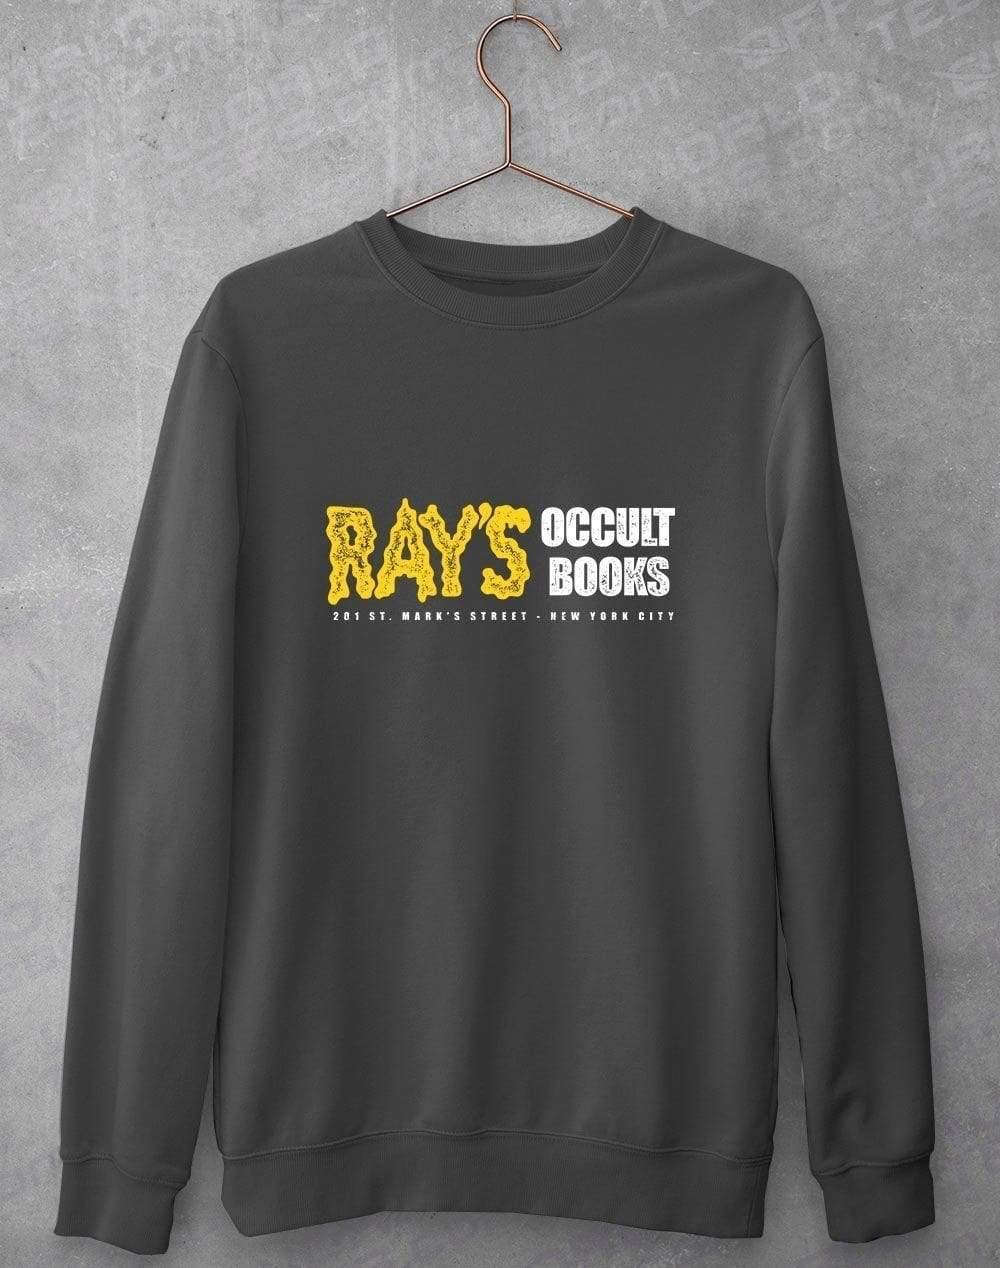 Rays Occult Books Sweatshirt S / Charcoal  - Off World Tees